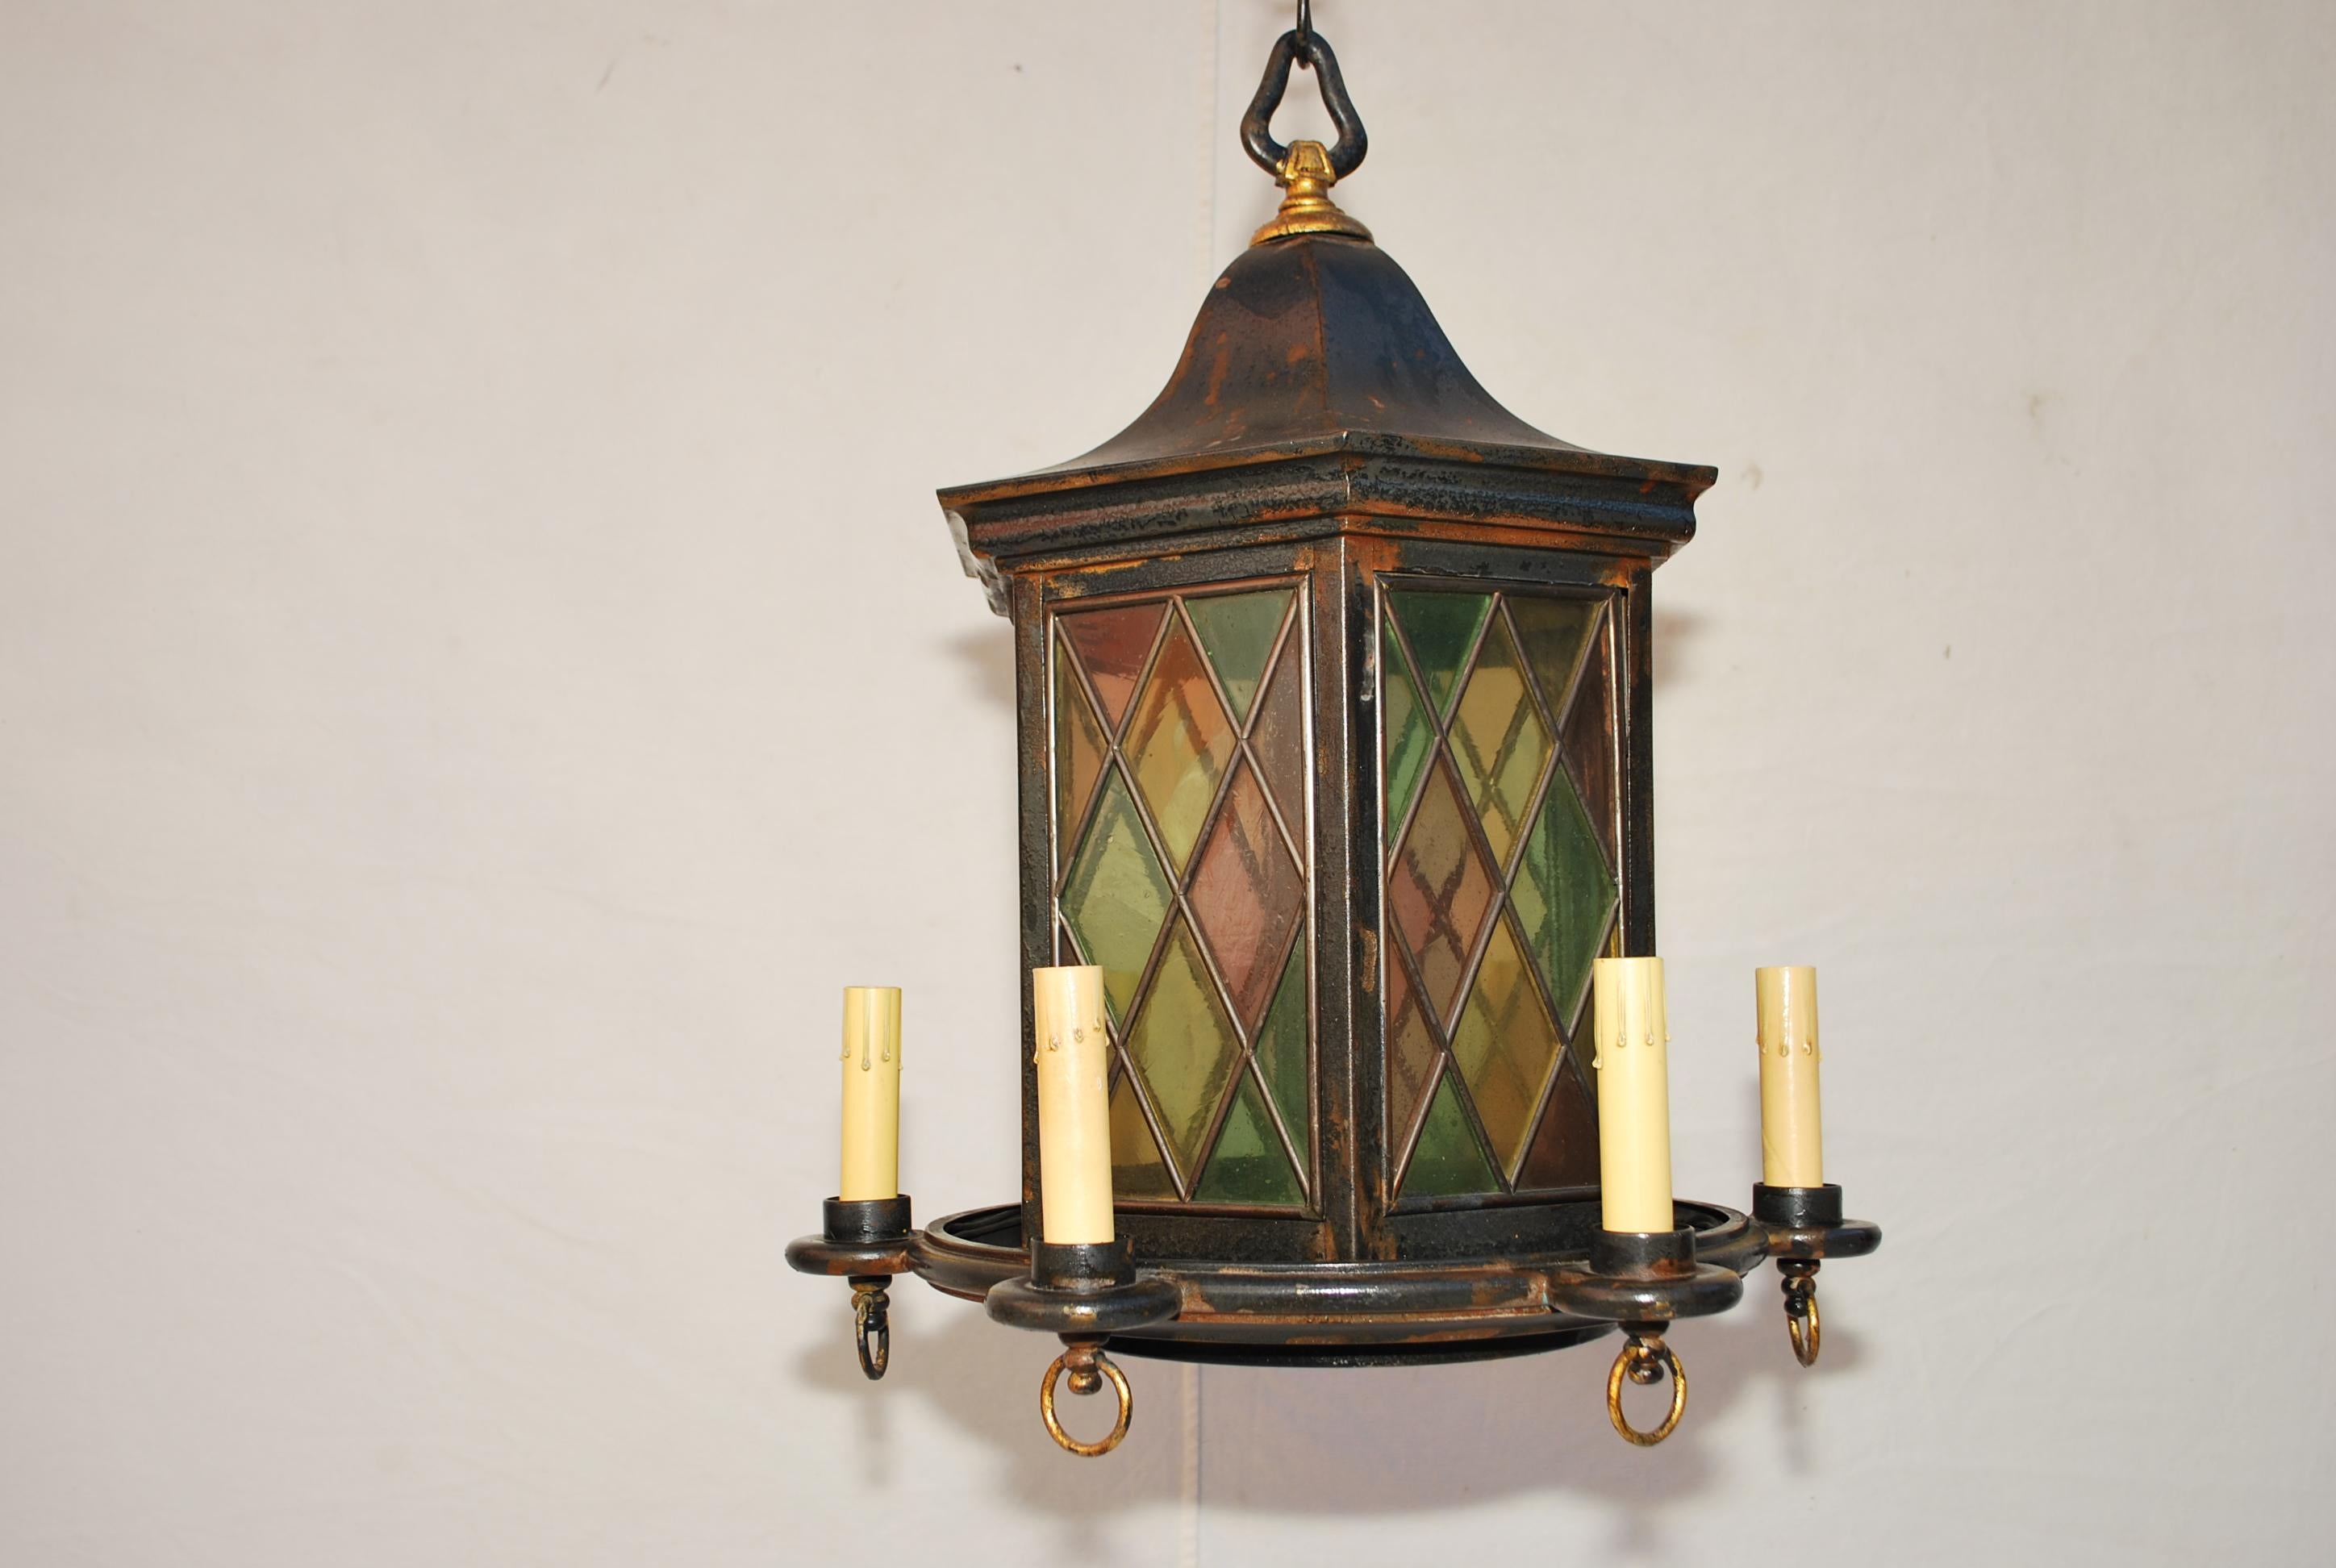 A very unusual lantern, it is quite different , to have light inside and outside, it is made of brass, so it could be by the beach or a lake